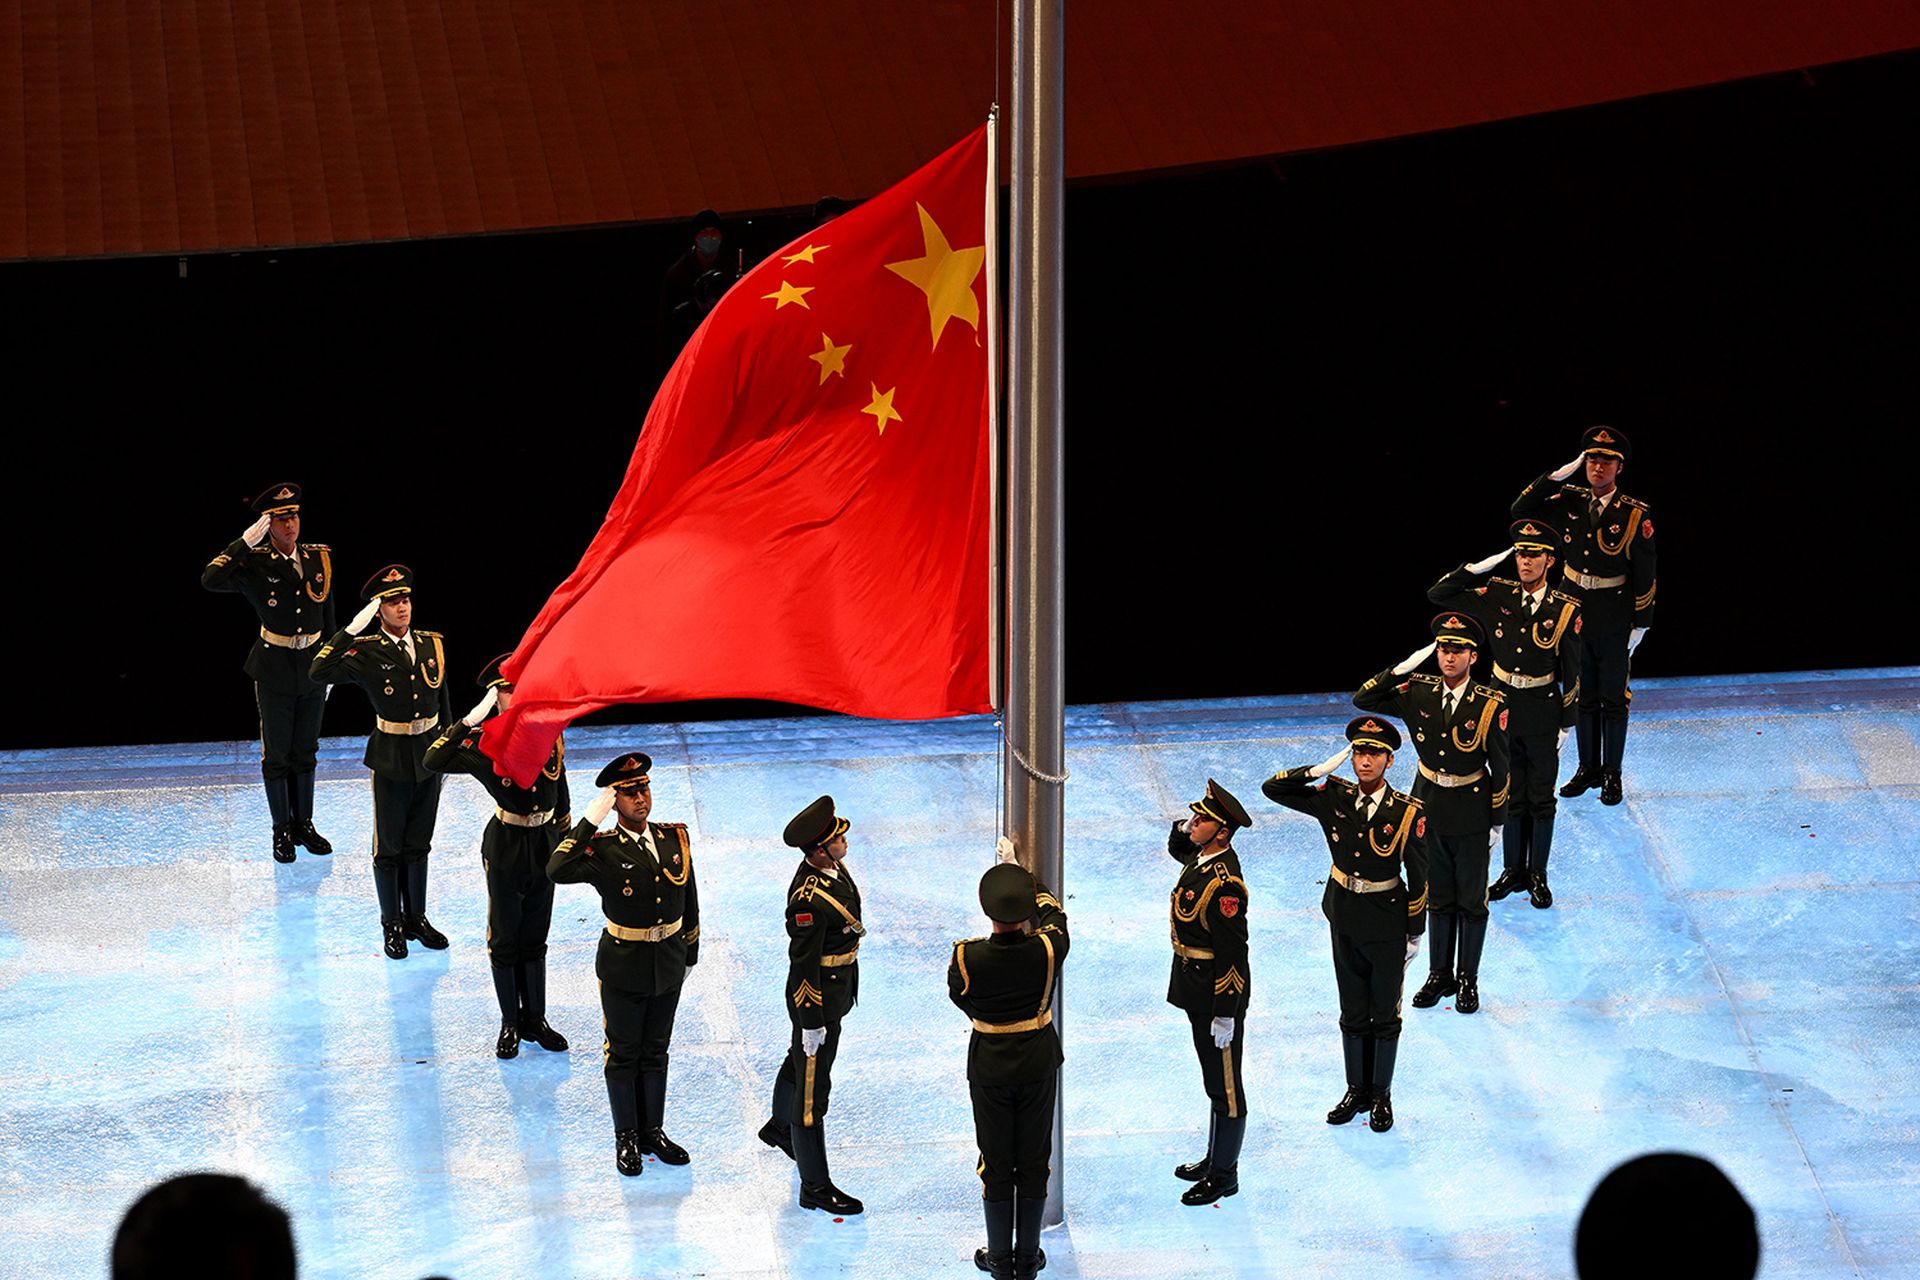 Mandiant researchers announced a Chinese-aligned operation called Dragonbridge that targeted rare earth mineral firms in the U.S., Australia and Canada. Pictured: The Chinese flag is raised inside the stadium during the closing ceremony of the 2022 Beijing Winter Paralympics on March 13, 2022, in Beijing. (Photo by Zhe Ji/Getty Images for Internati...